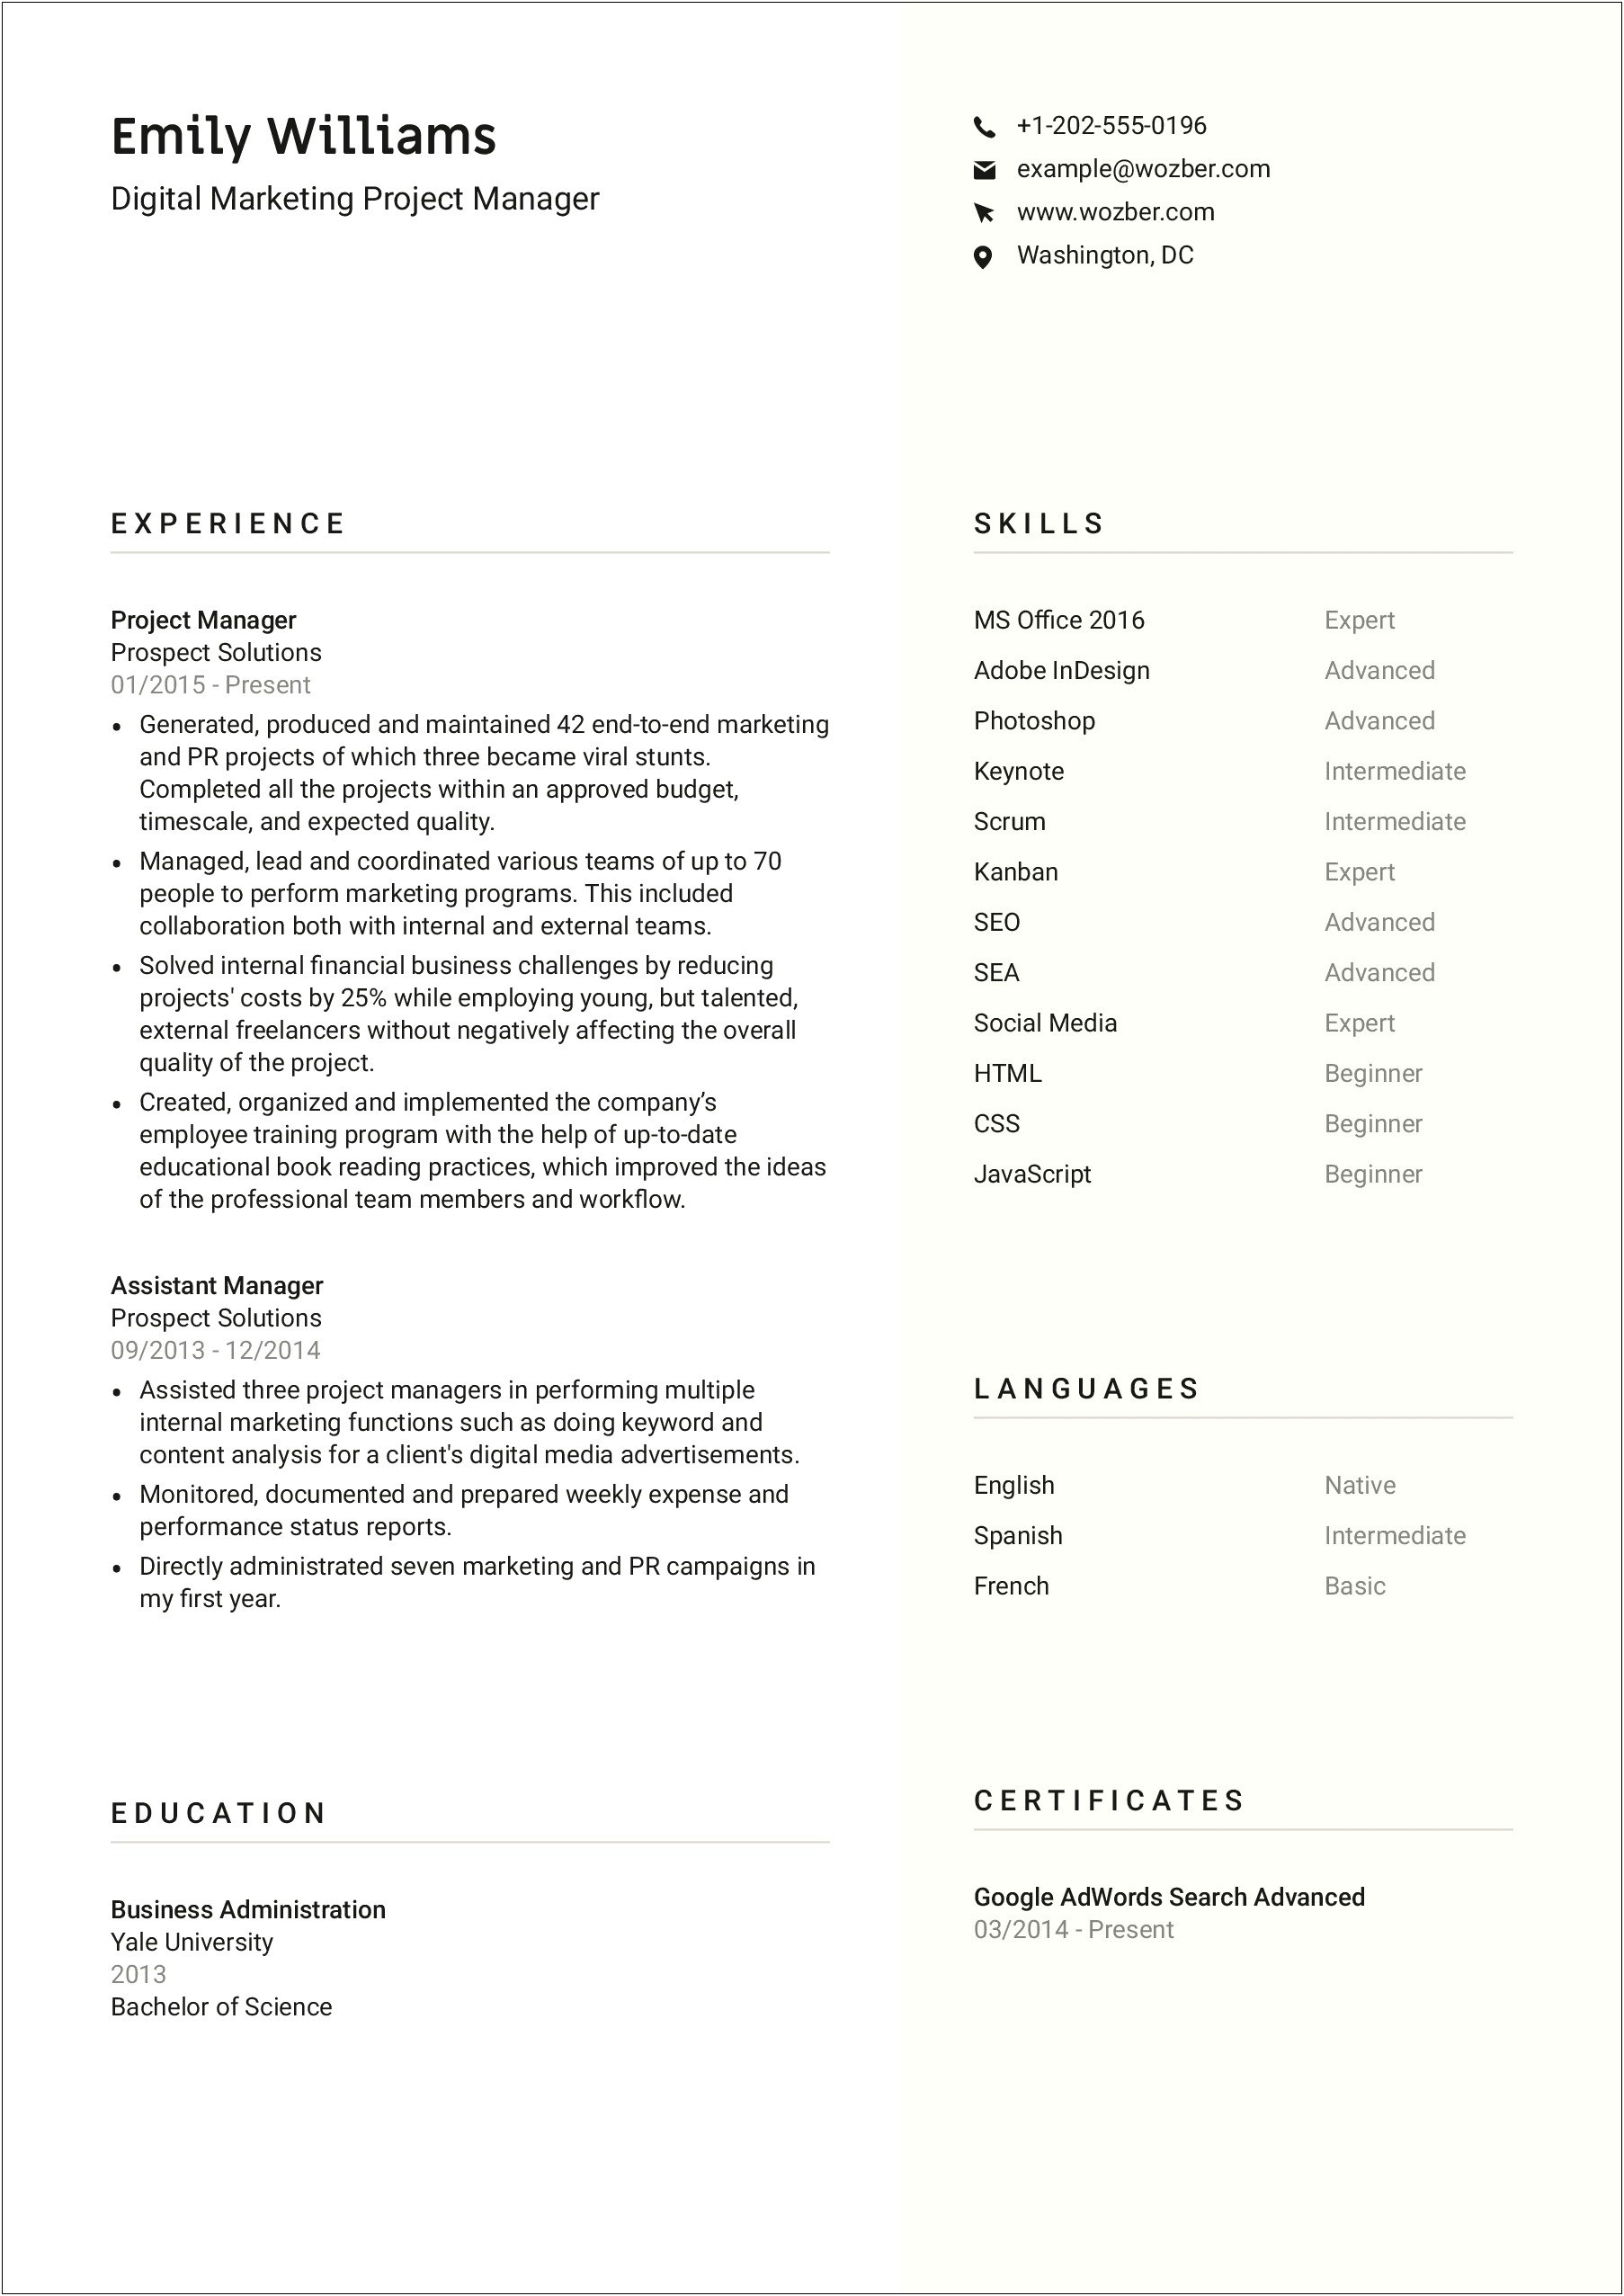 Resume Samples For New Home Sales